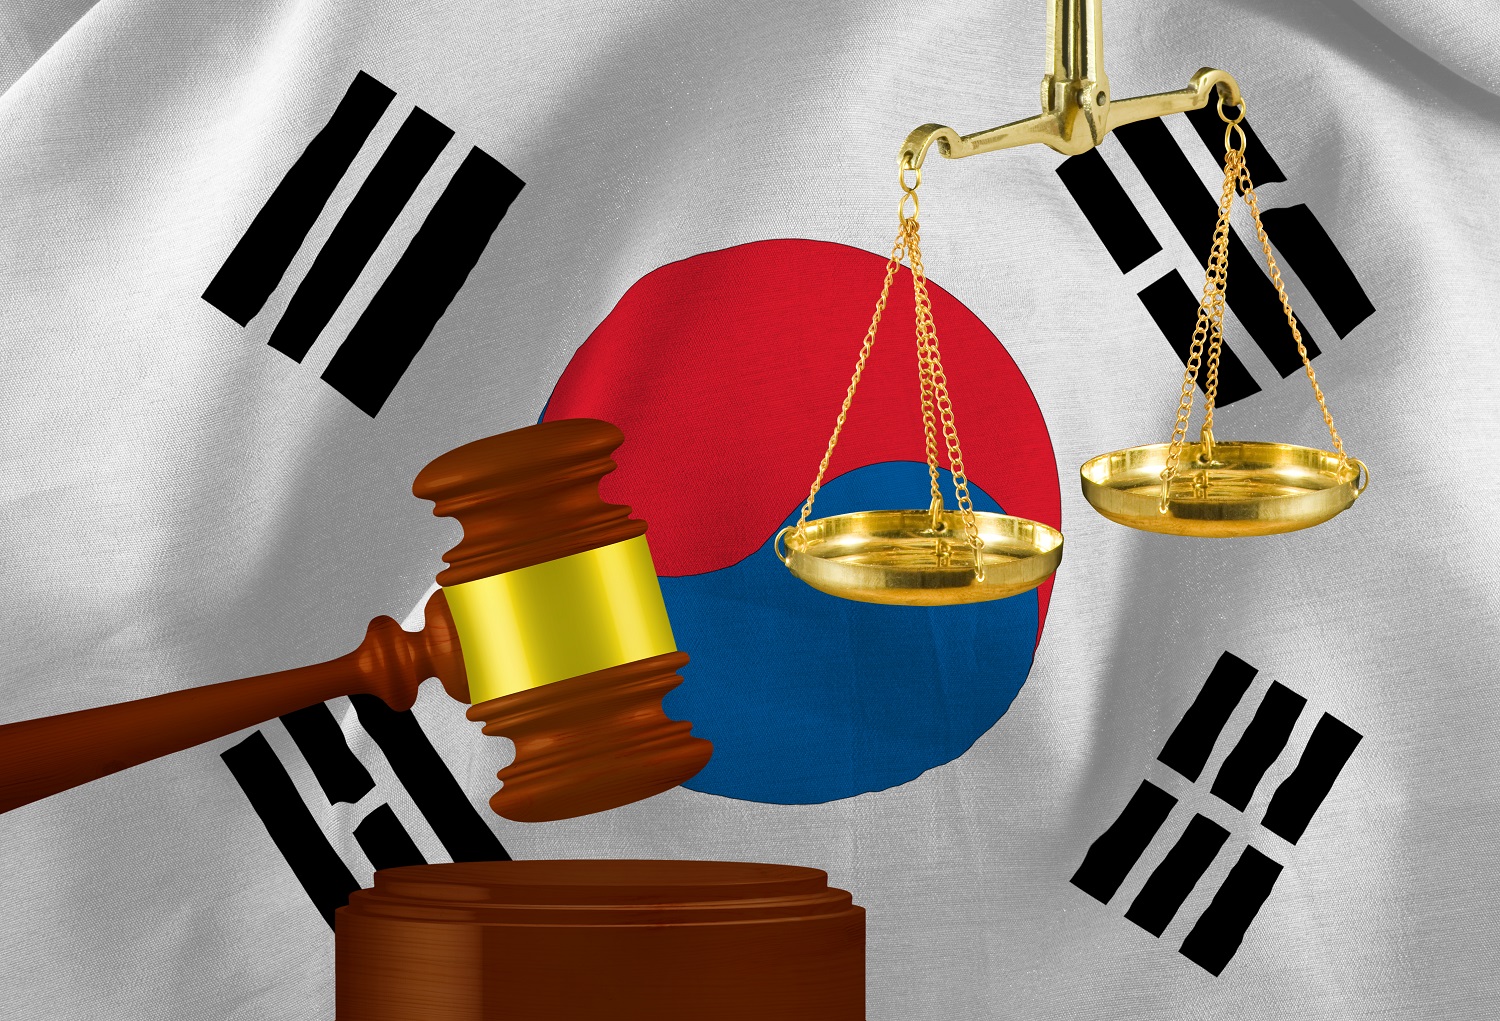 A judge&amp;amp;amp;rsquo;s gavel and scales against a background of the flag of South Korea.